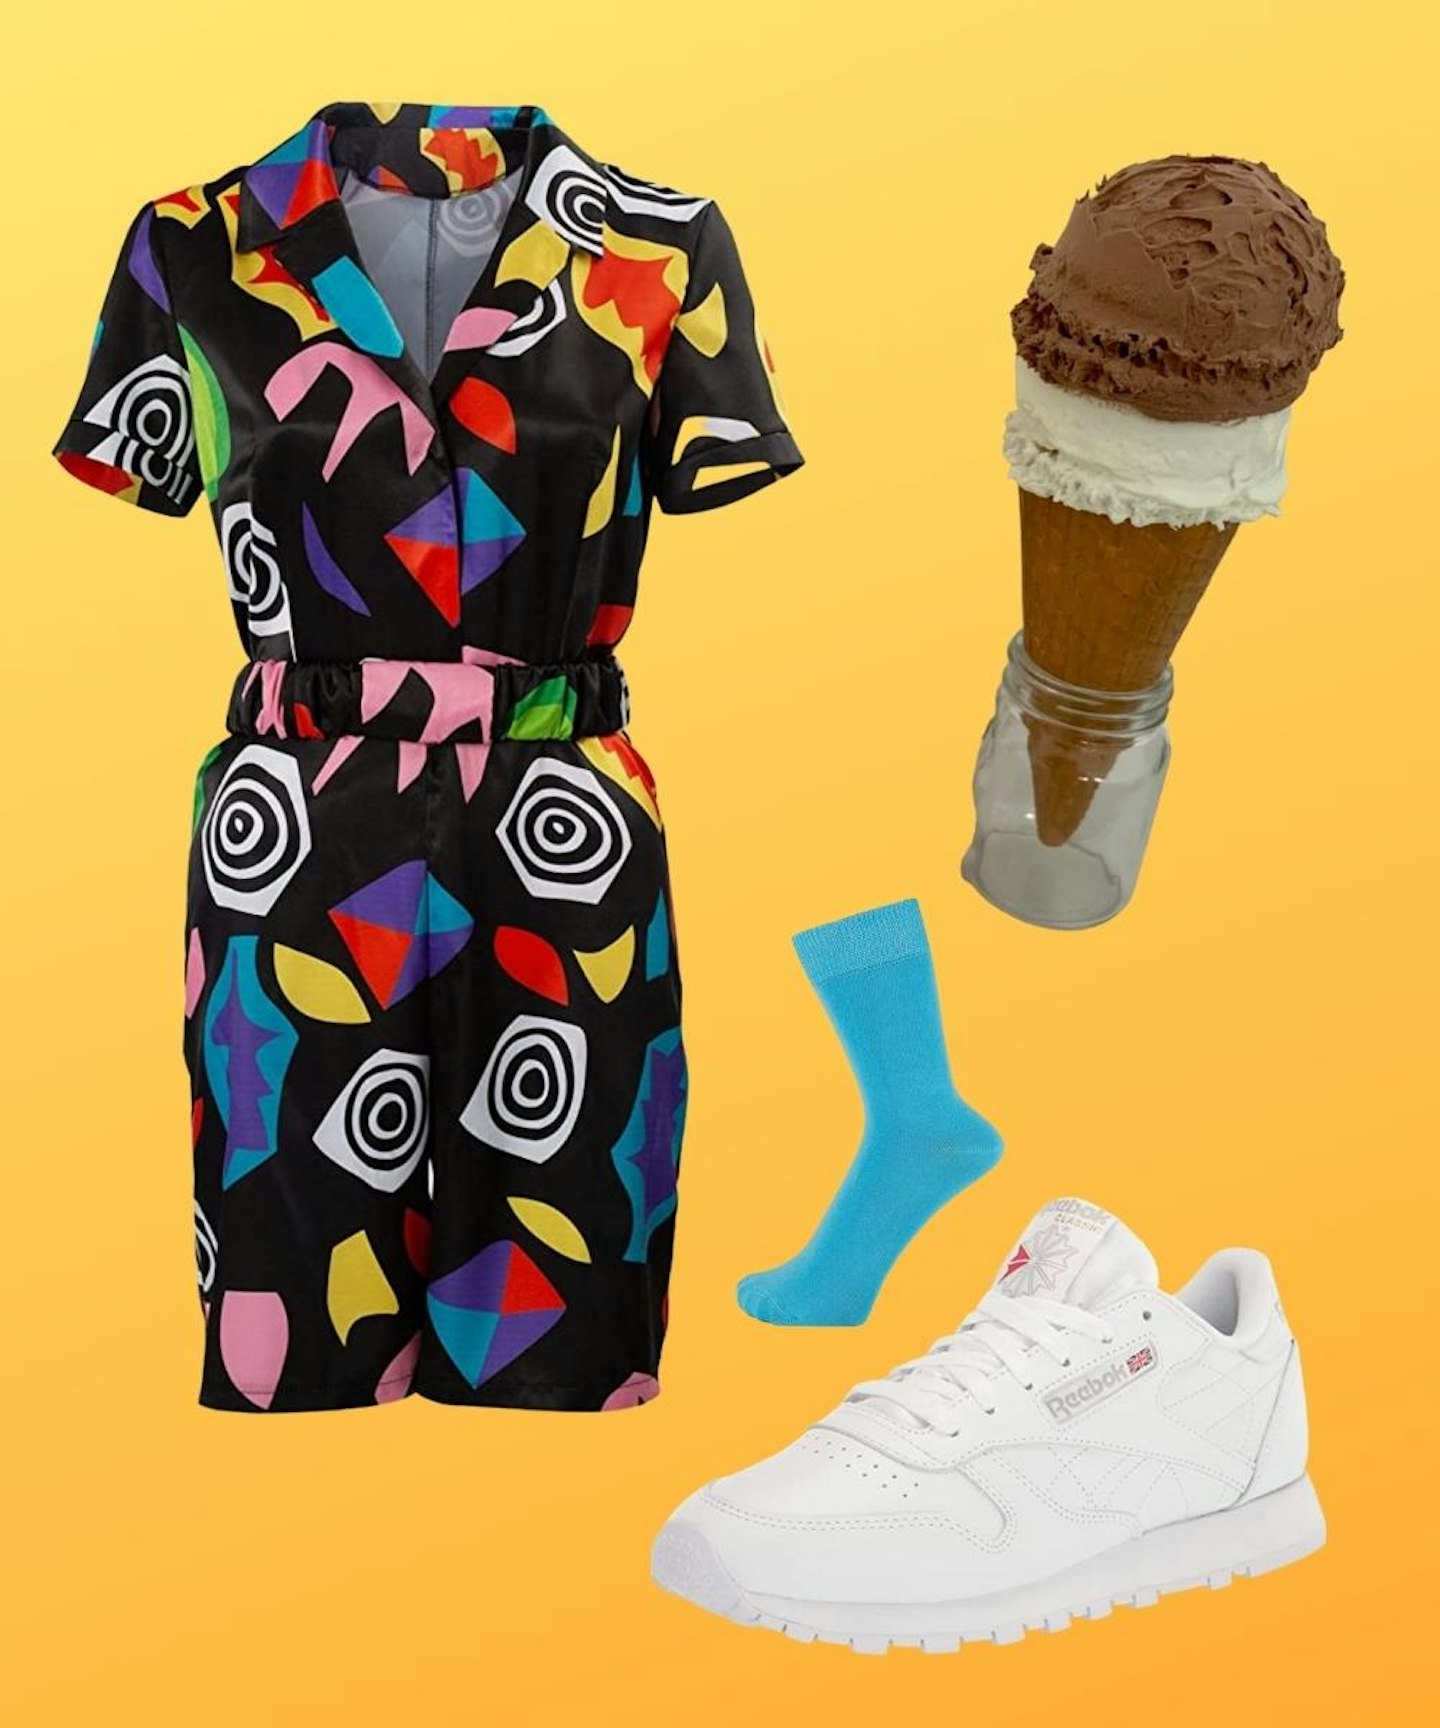 Eleven's Shopping Mall Jumpsuit Costume